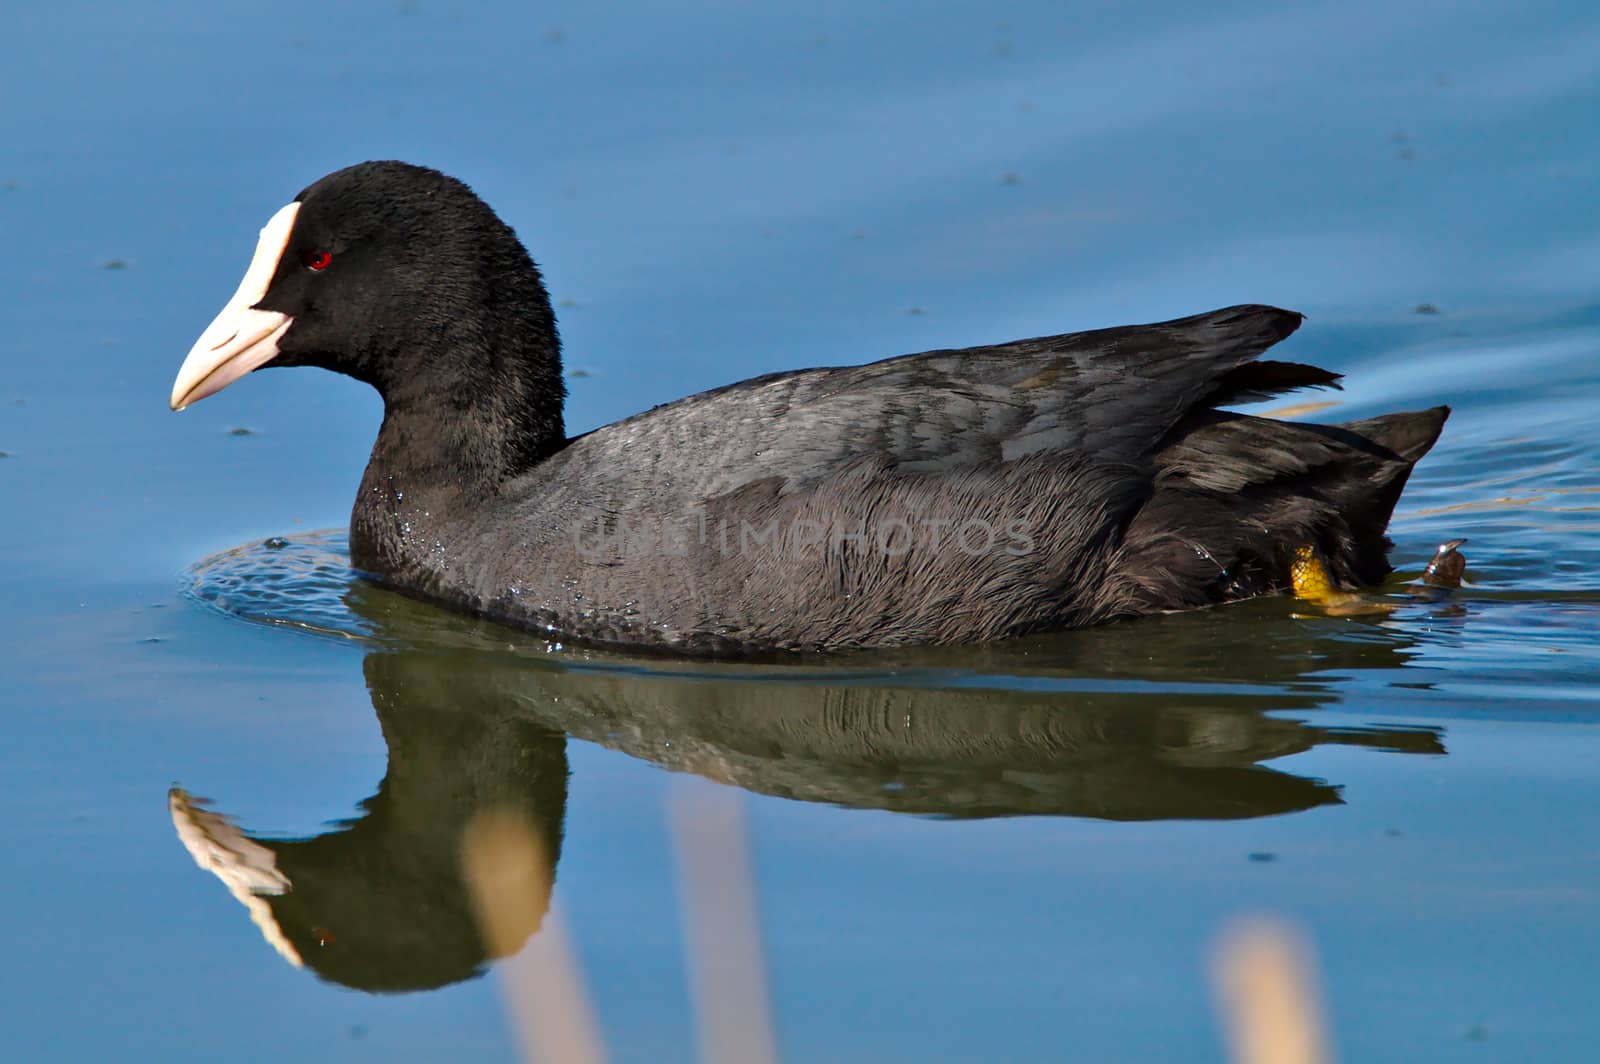 Eurasian coot swimming on blue steady water with reflection from the surface.